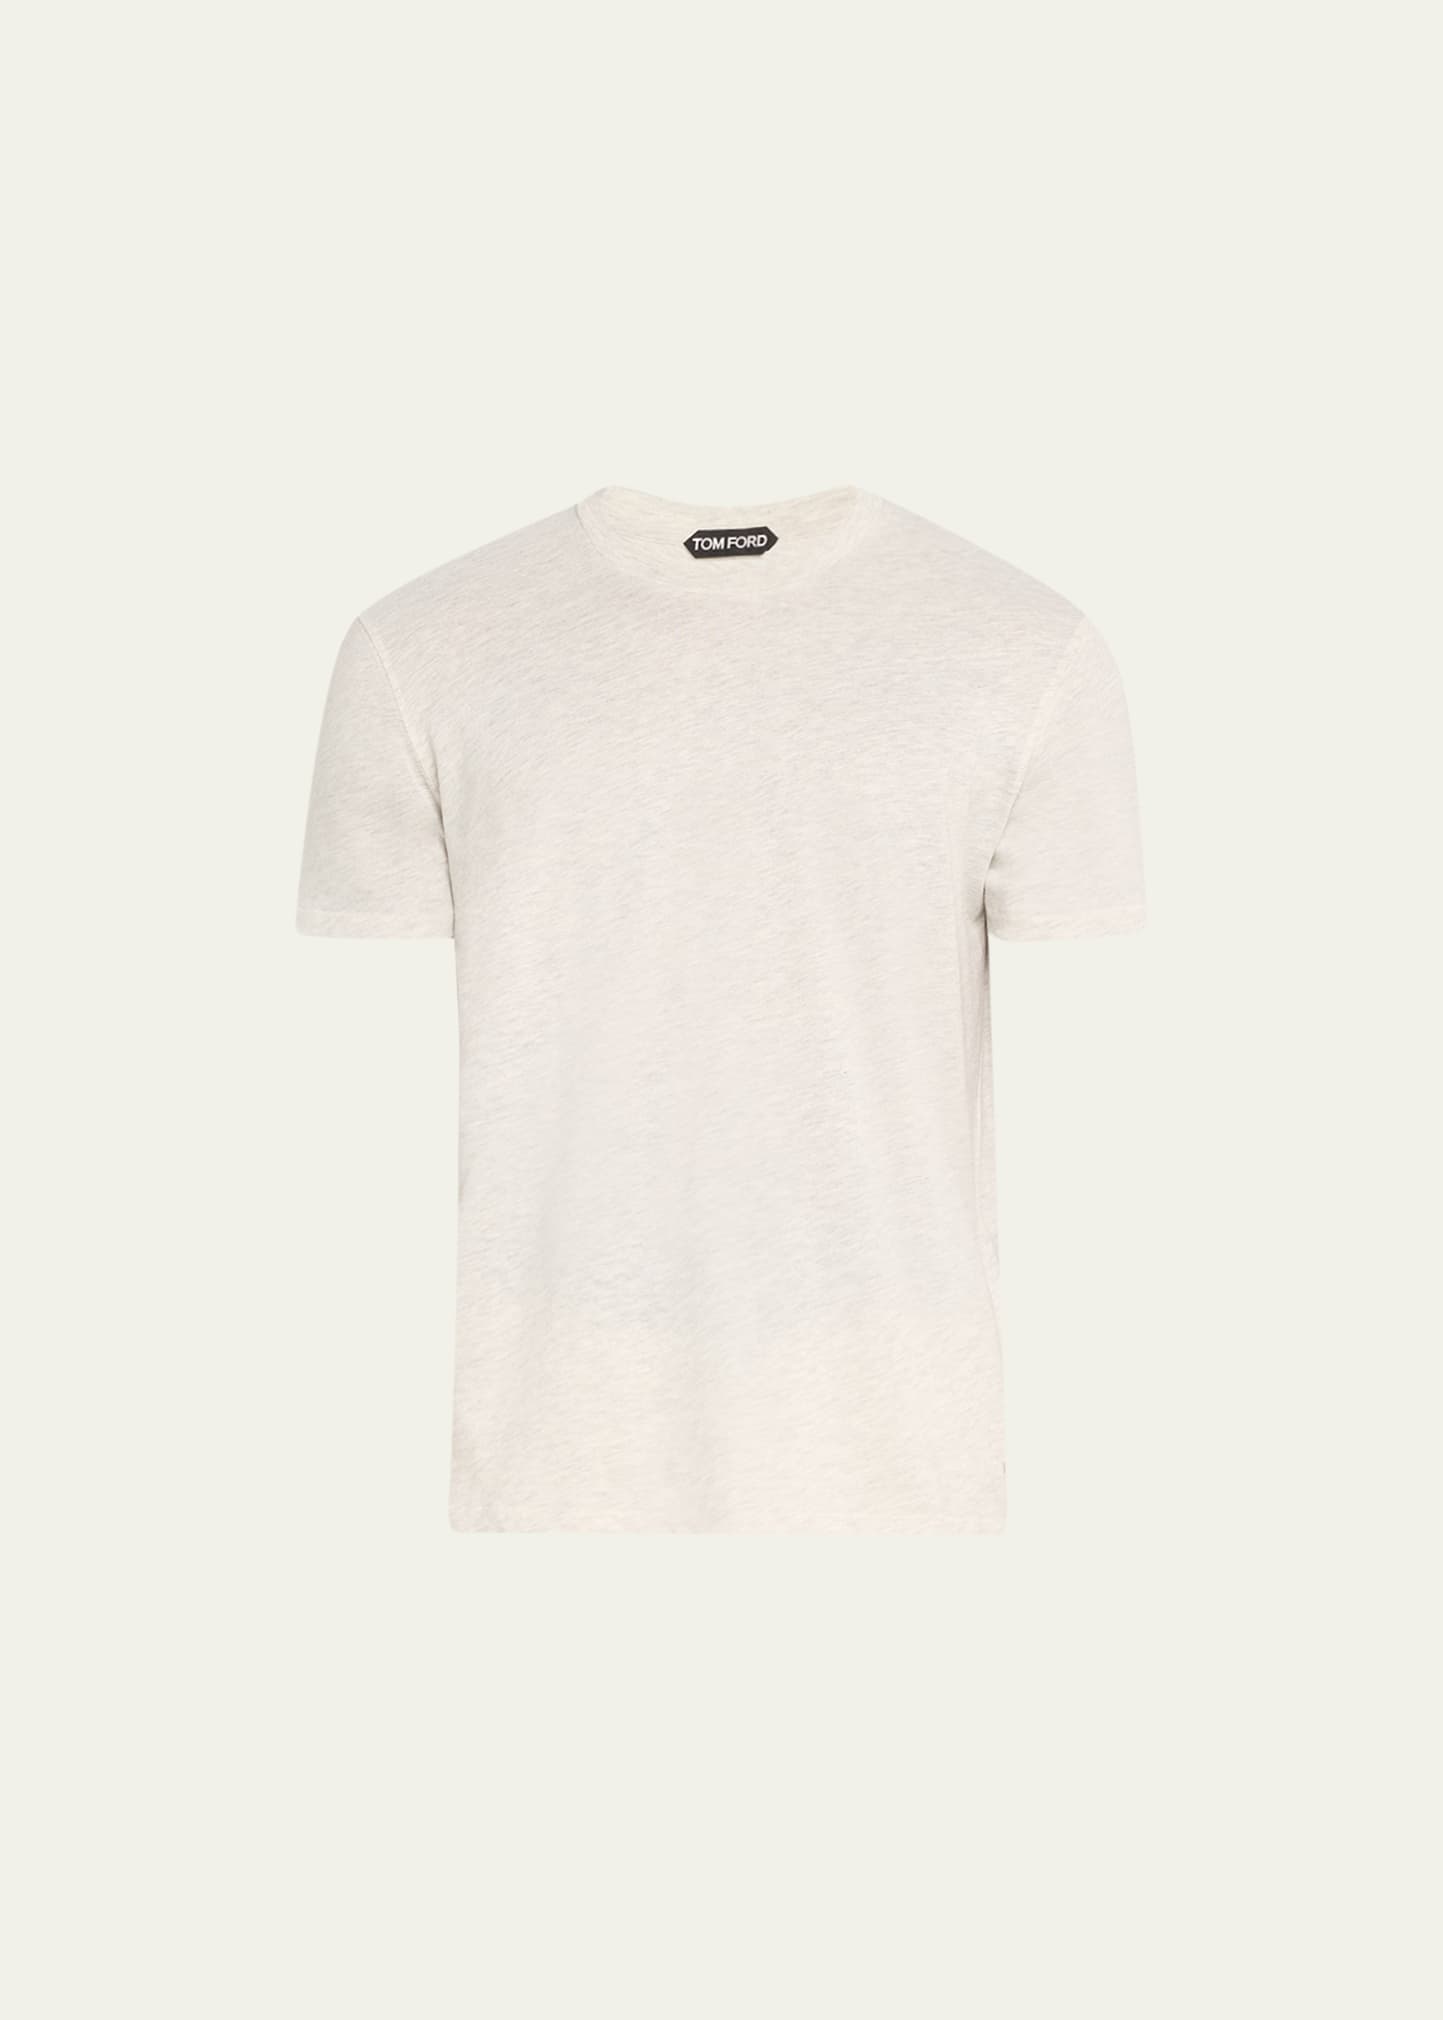 Tom Ford Men's Cotton Crewneck T-shirt In Pale Grey